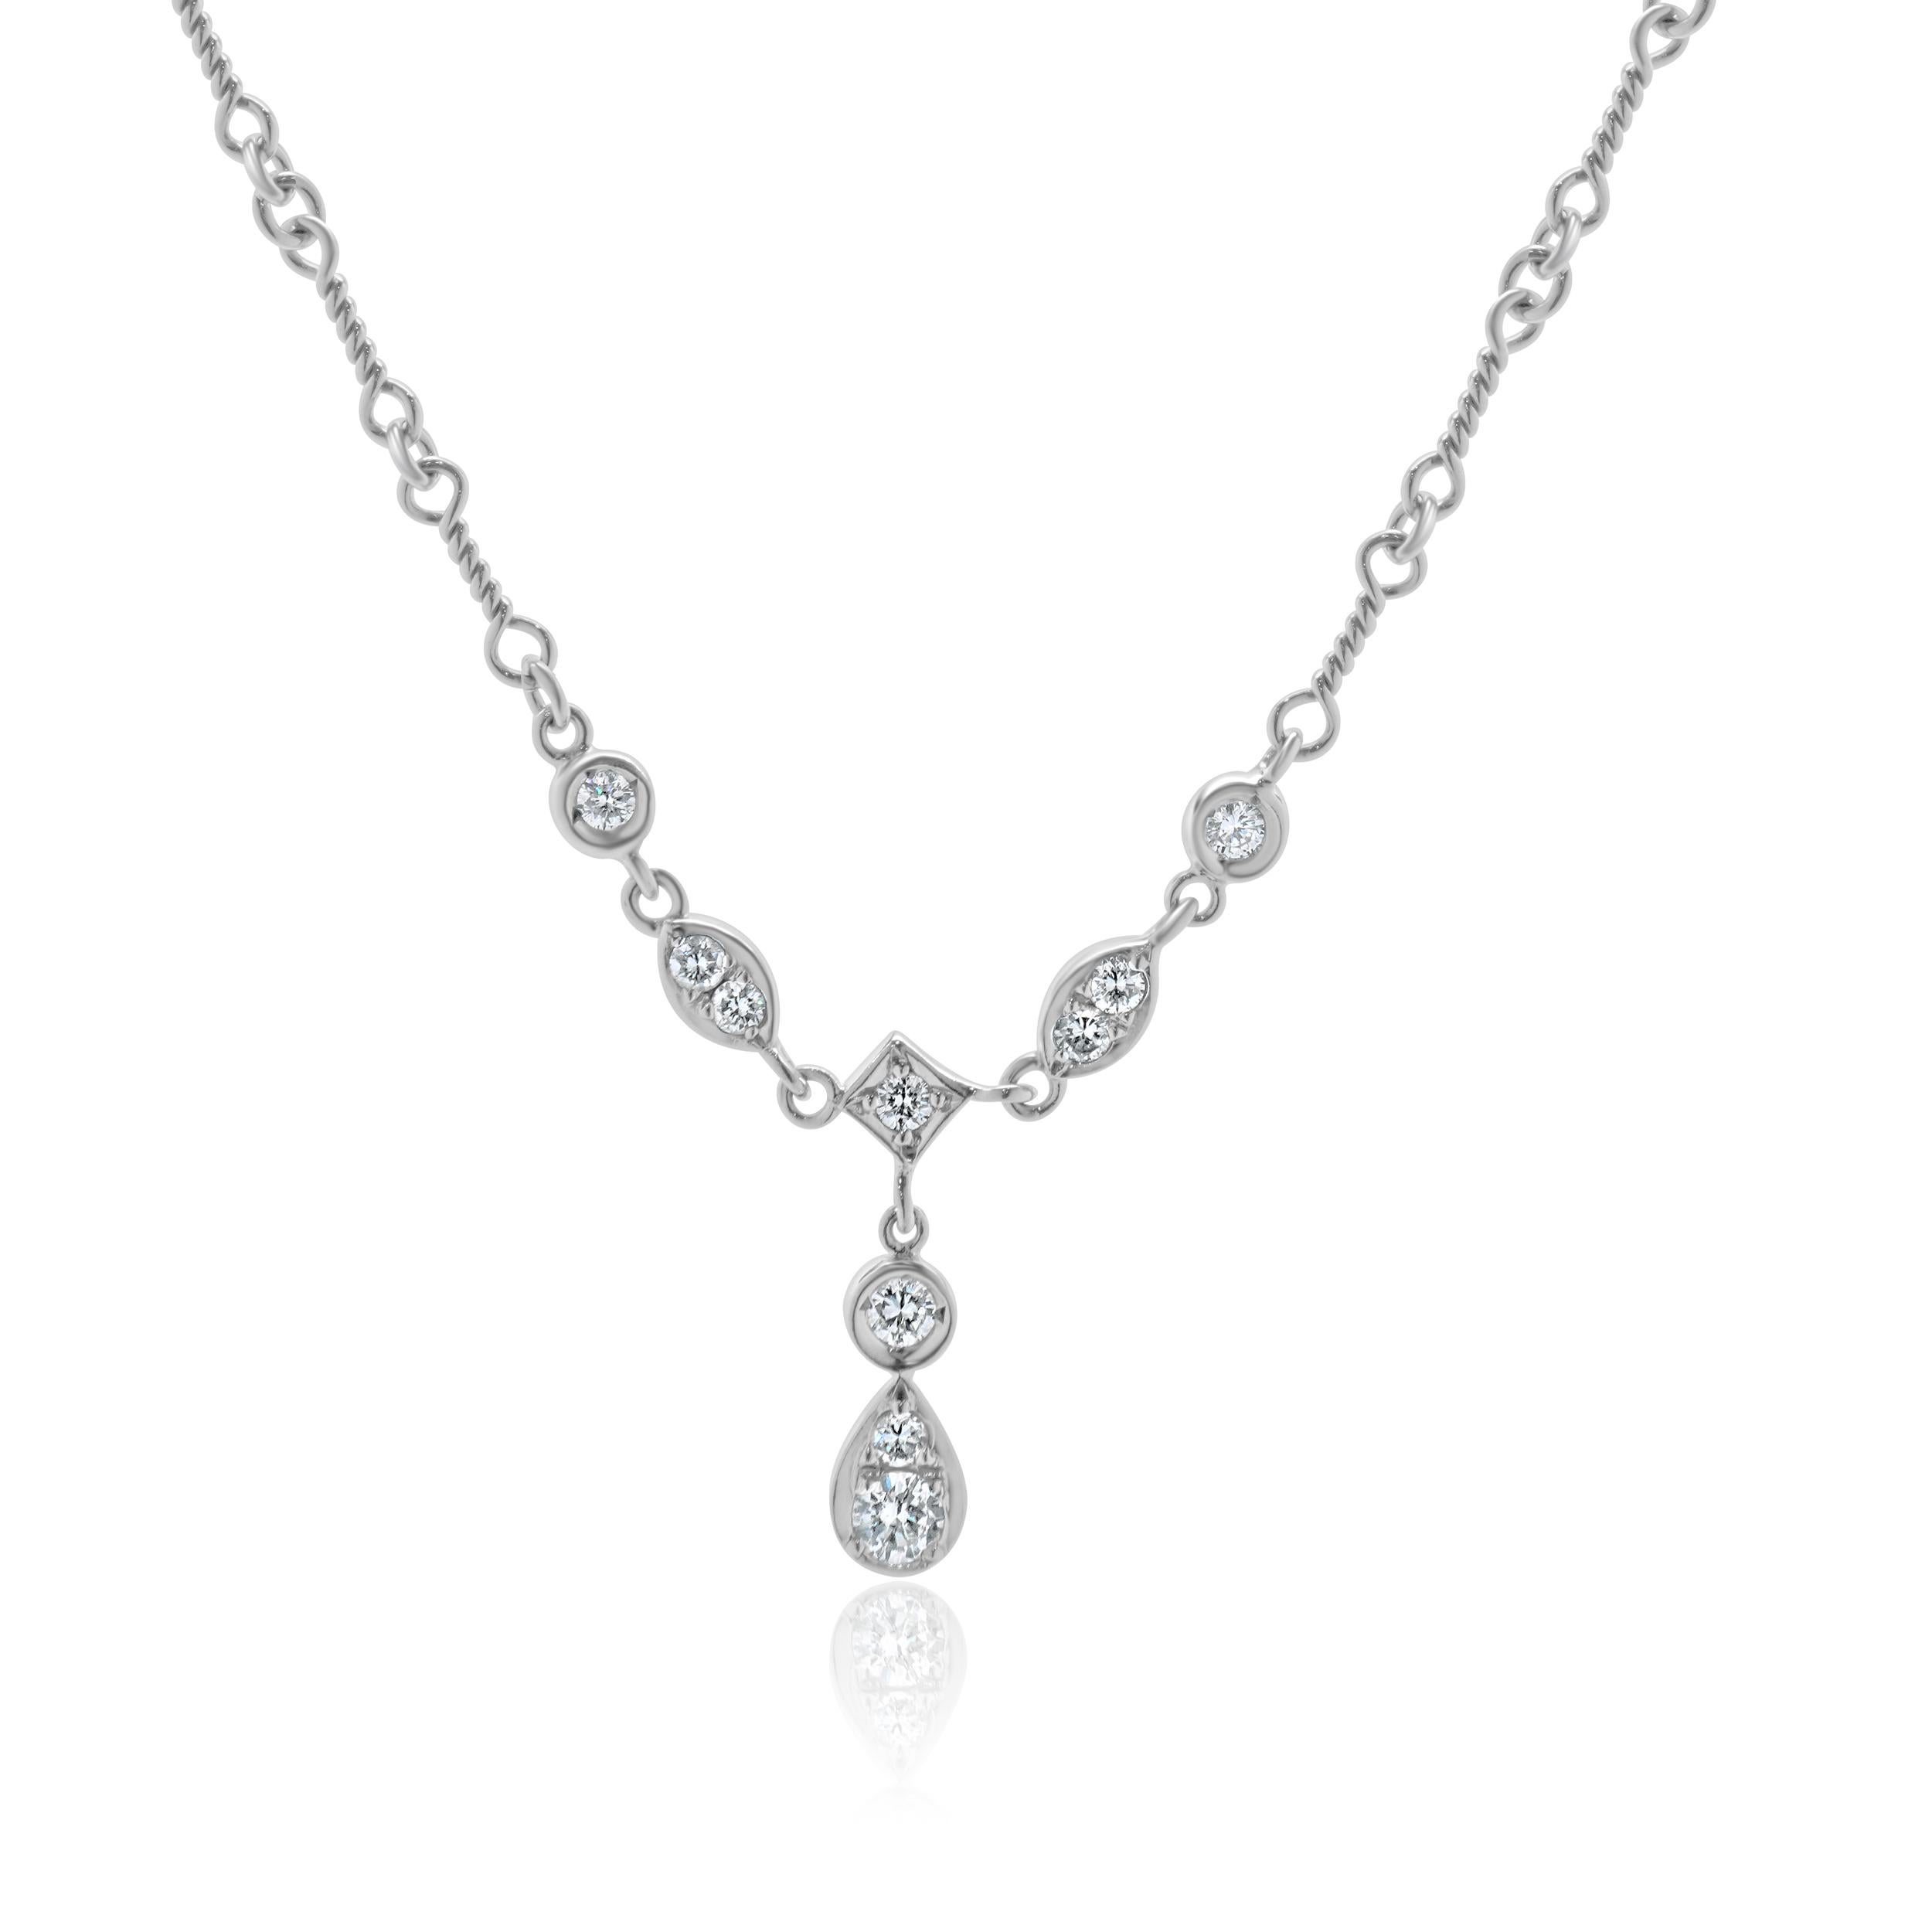 Designer: custom
Material: 18K white gold
Diamonds: 10 round brilliant cut = 0.43cttw
Color: I
Clarity: SI1
Dimensions: necklace measures 16.25-inches in length 
Weight: 7.32 grams
